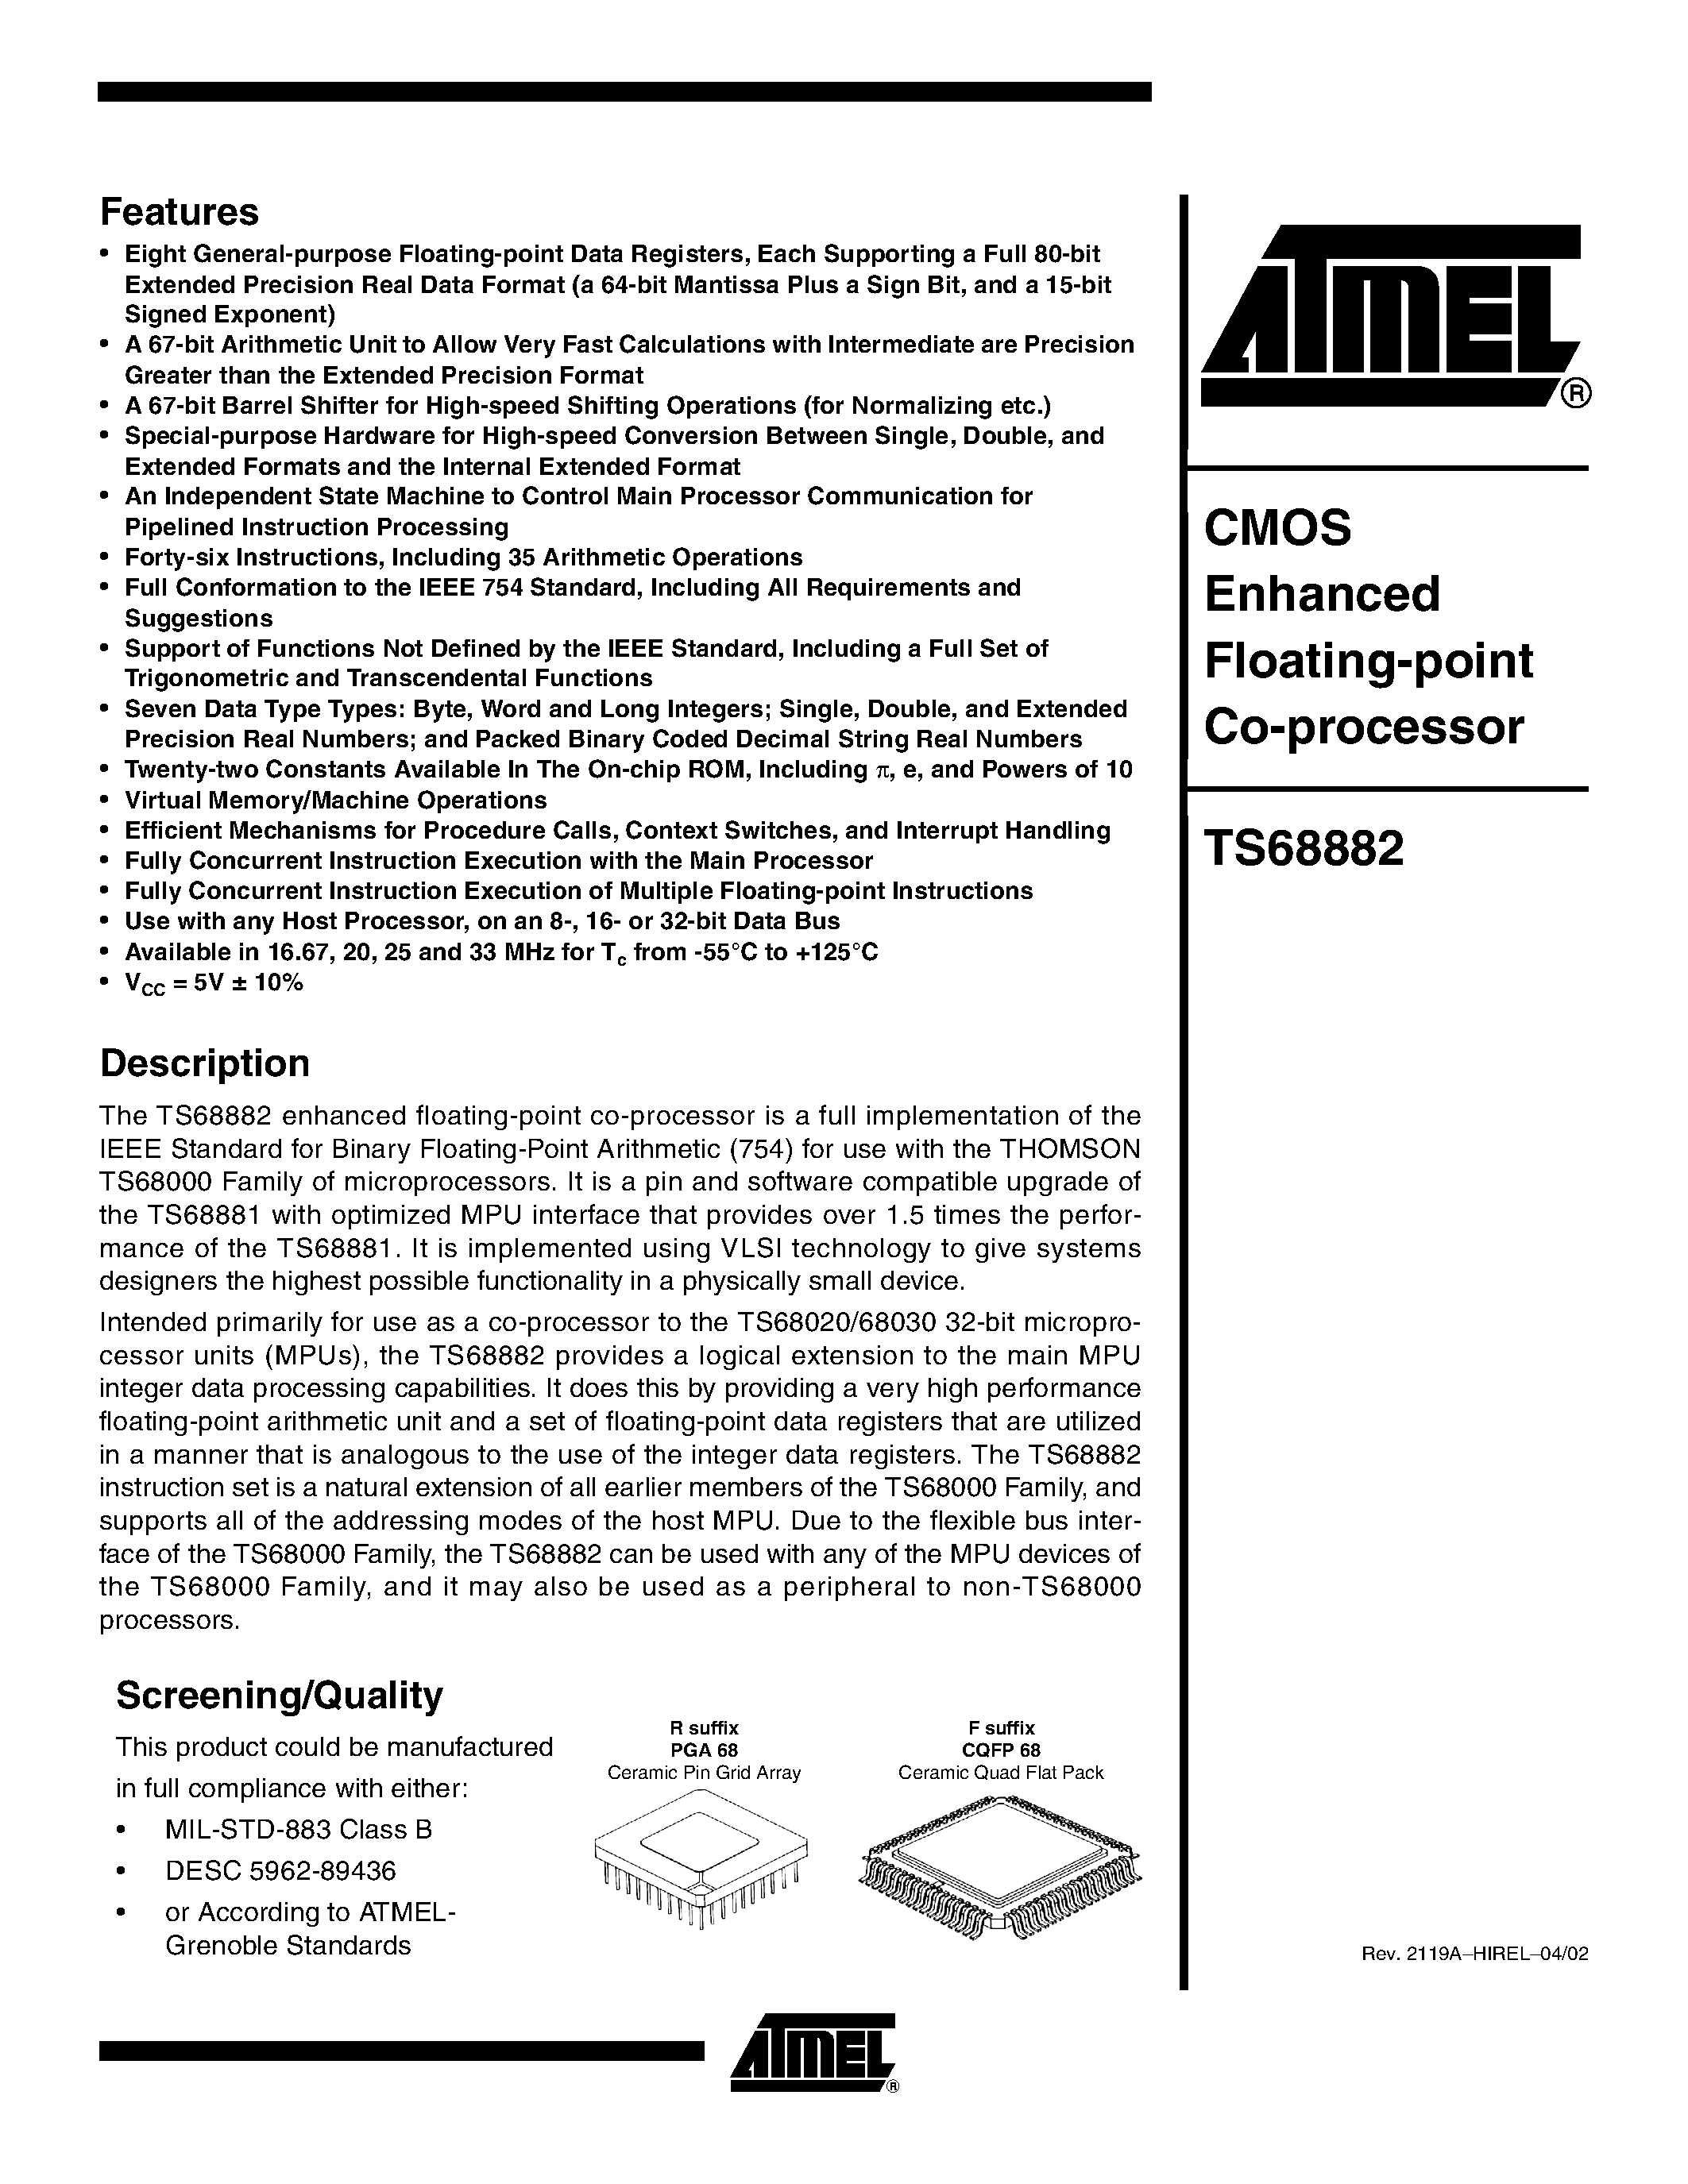 Datasheet TS68882VF16 - CMOS Enhanced Floating-point Co-processor page 1